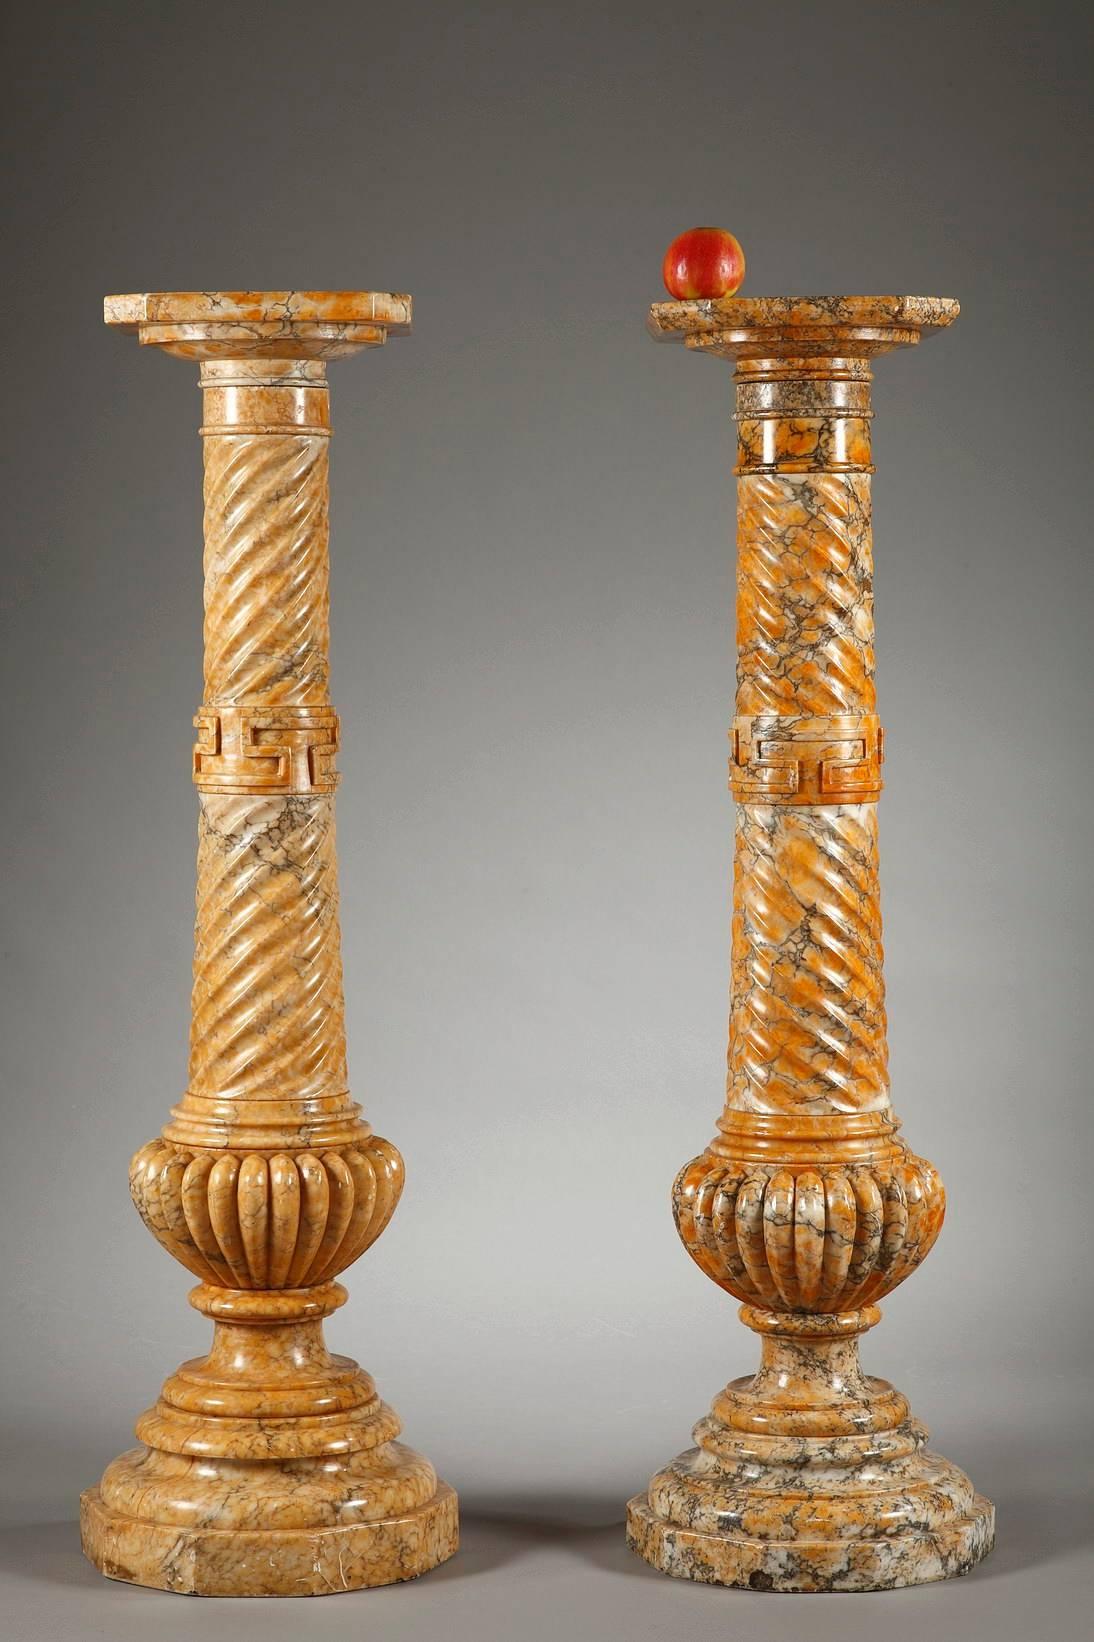 Two spiraling columns with Doric capitals in yellow Sienna marble. Each column is decorated with Greek friezes and rests on a high, circular base with multiple terraced, beveled edges. Some small differences between the two columns,
 
 circa